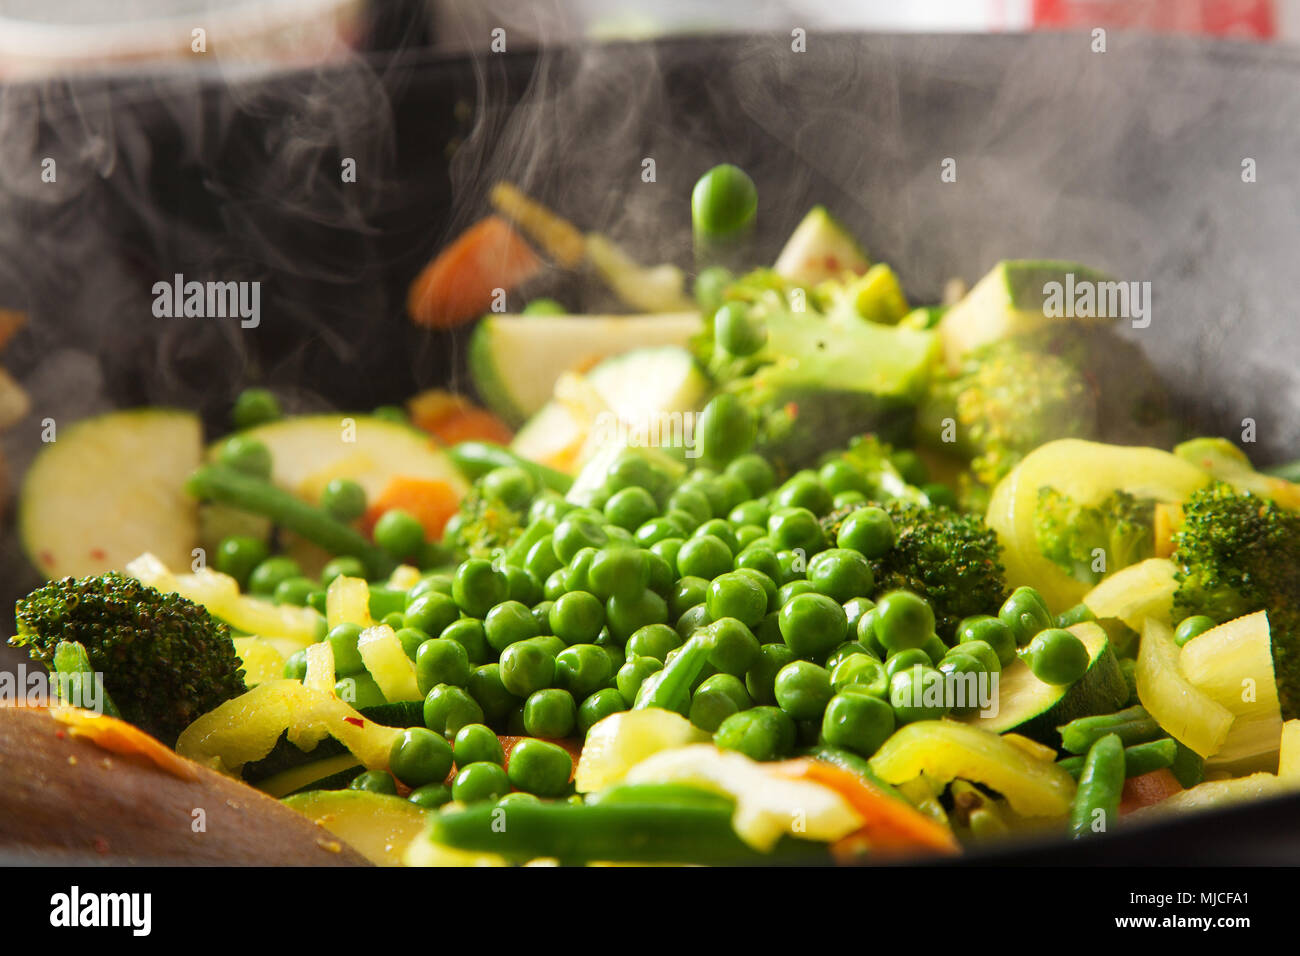 wok cooking with vegetables, carrots, zucchini, pole beans, broccoli, milk,  fresh and healthy Stock Photo - Alamy